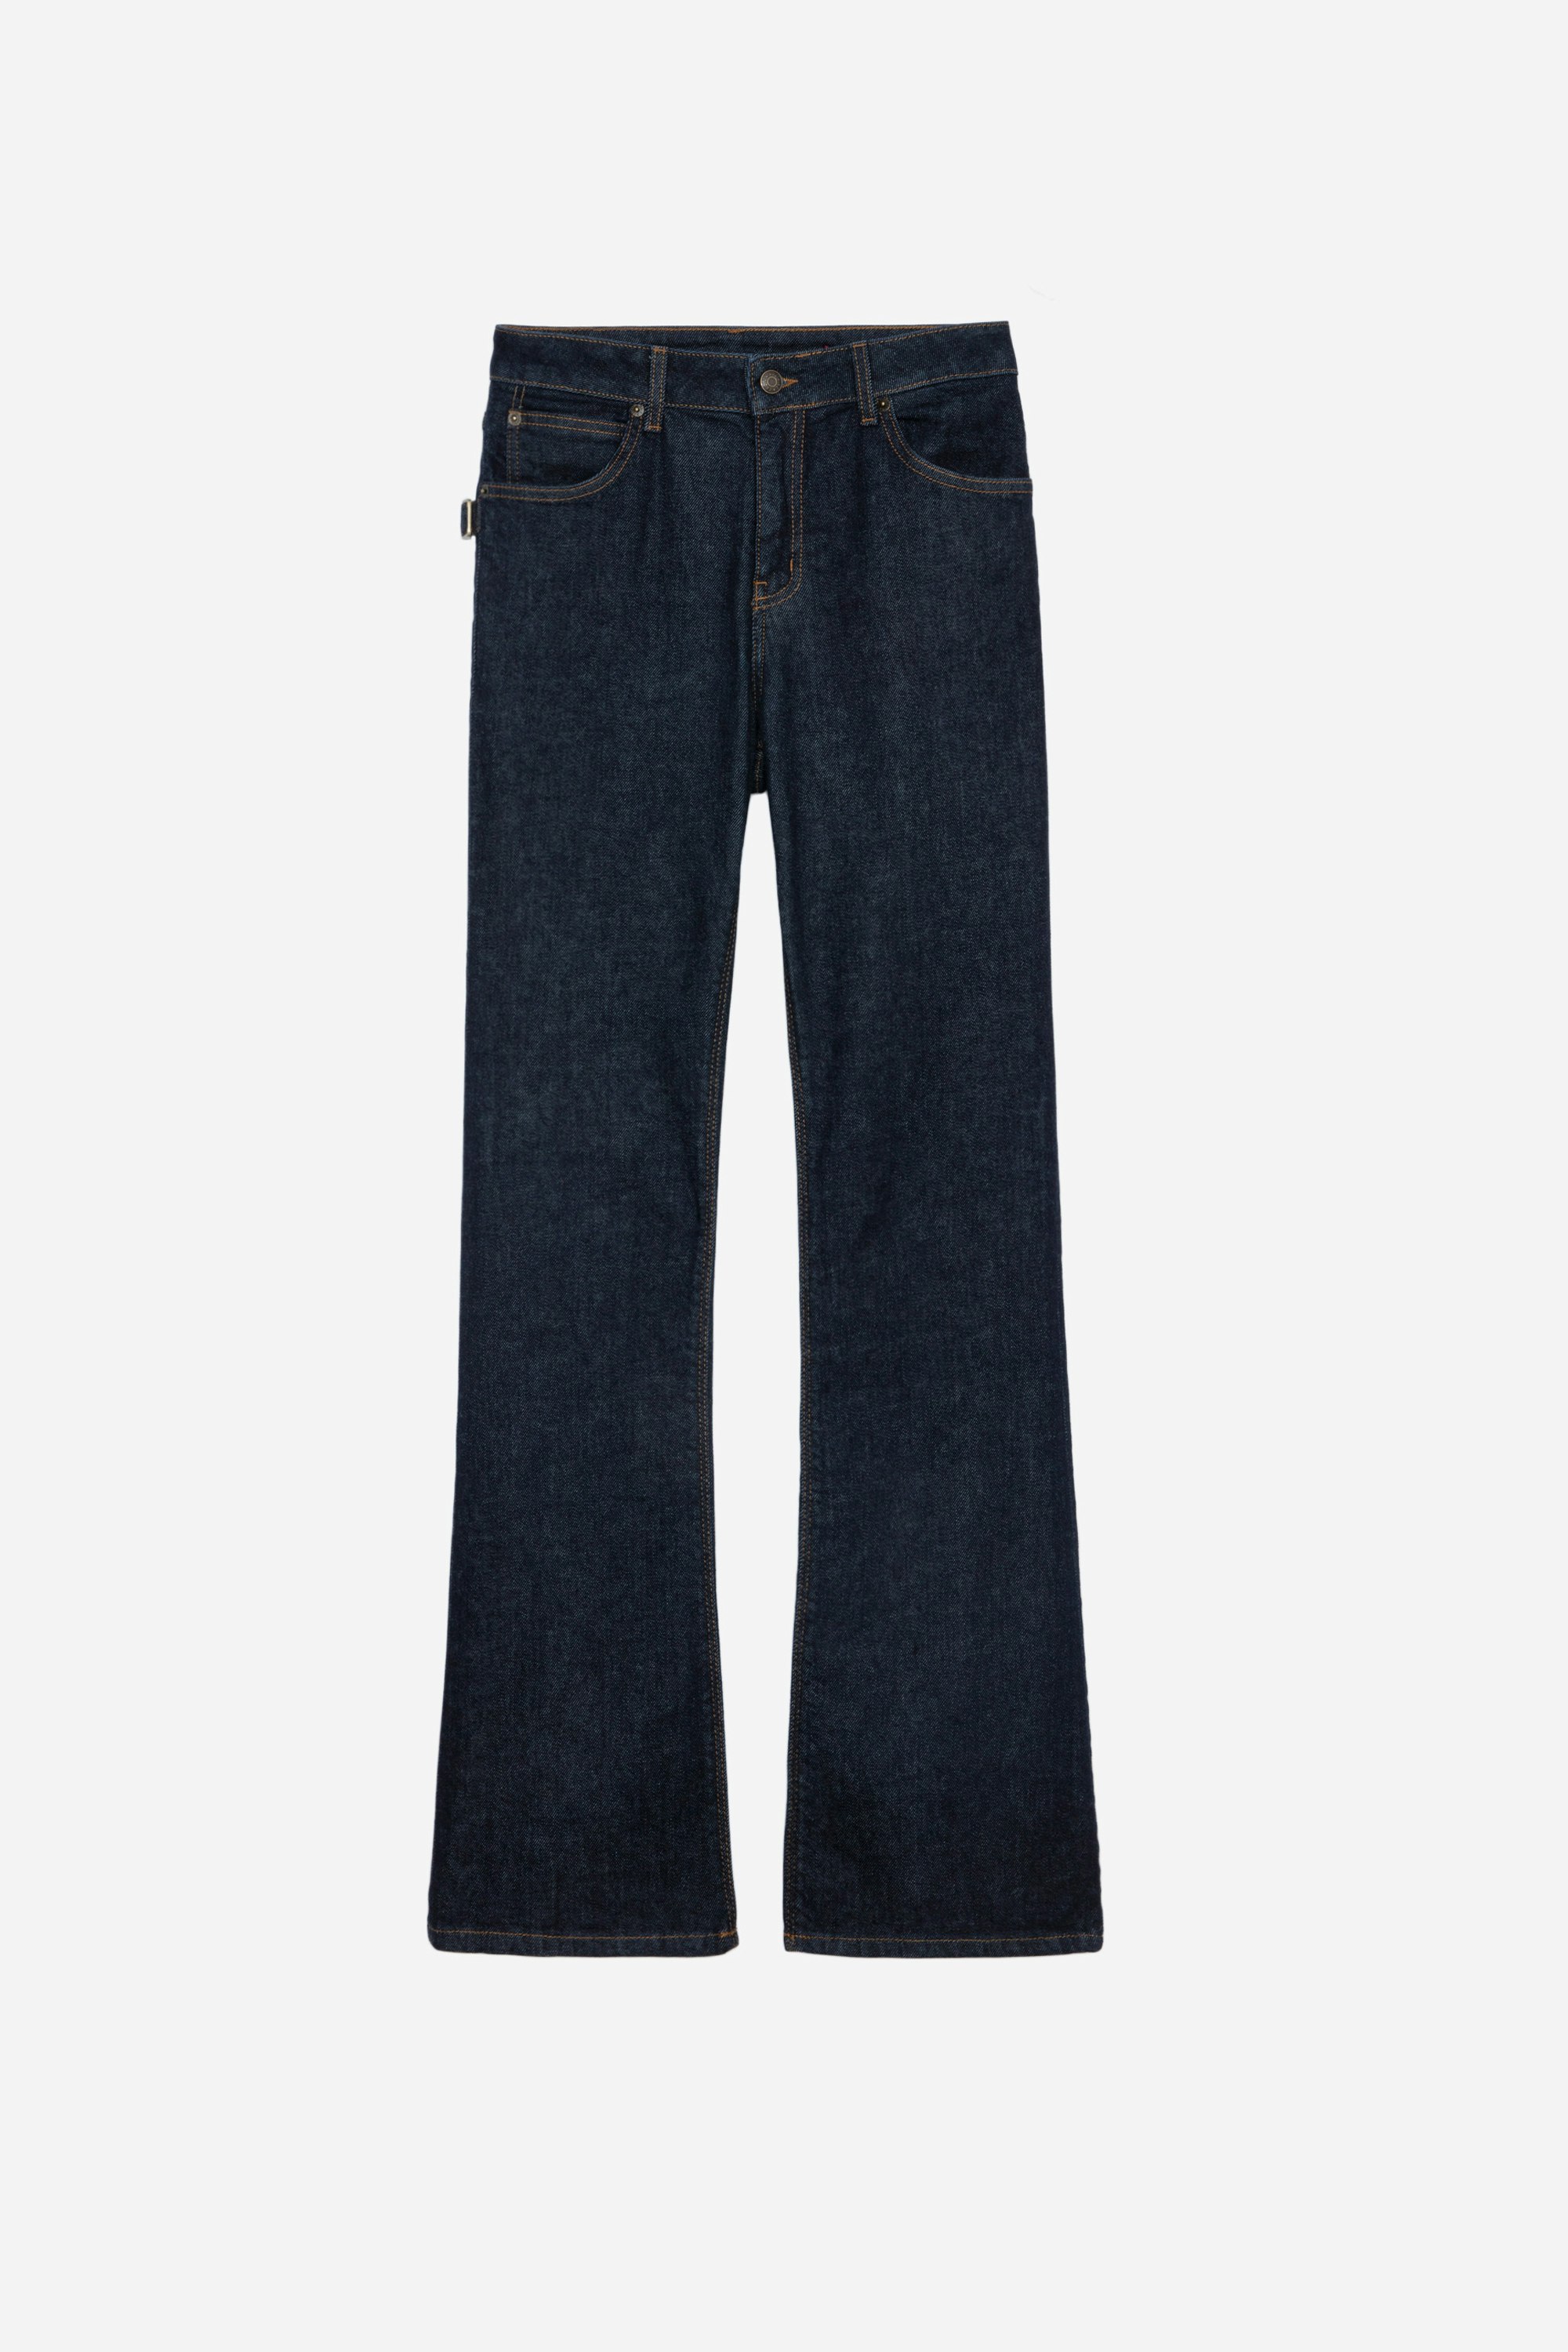 Emile Jeans - Women's wide denim jeans with "Emile" embroidery.